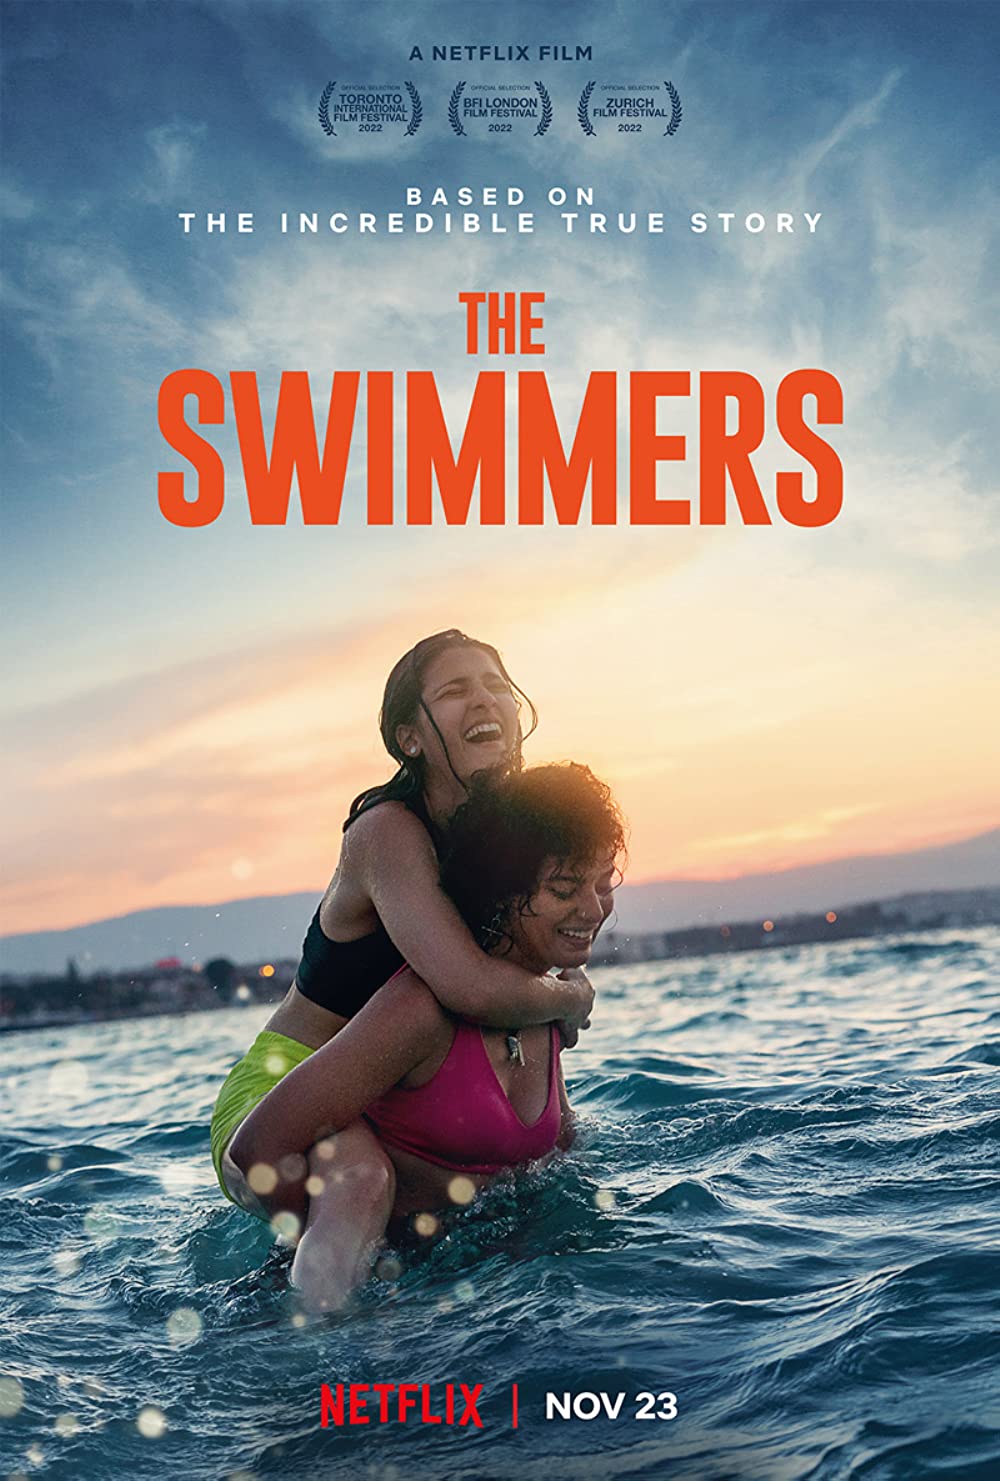 The Swimmers on Netflix movie poster